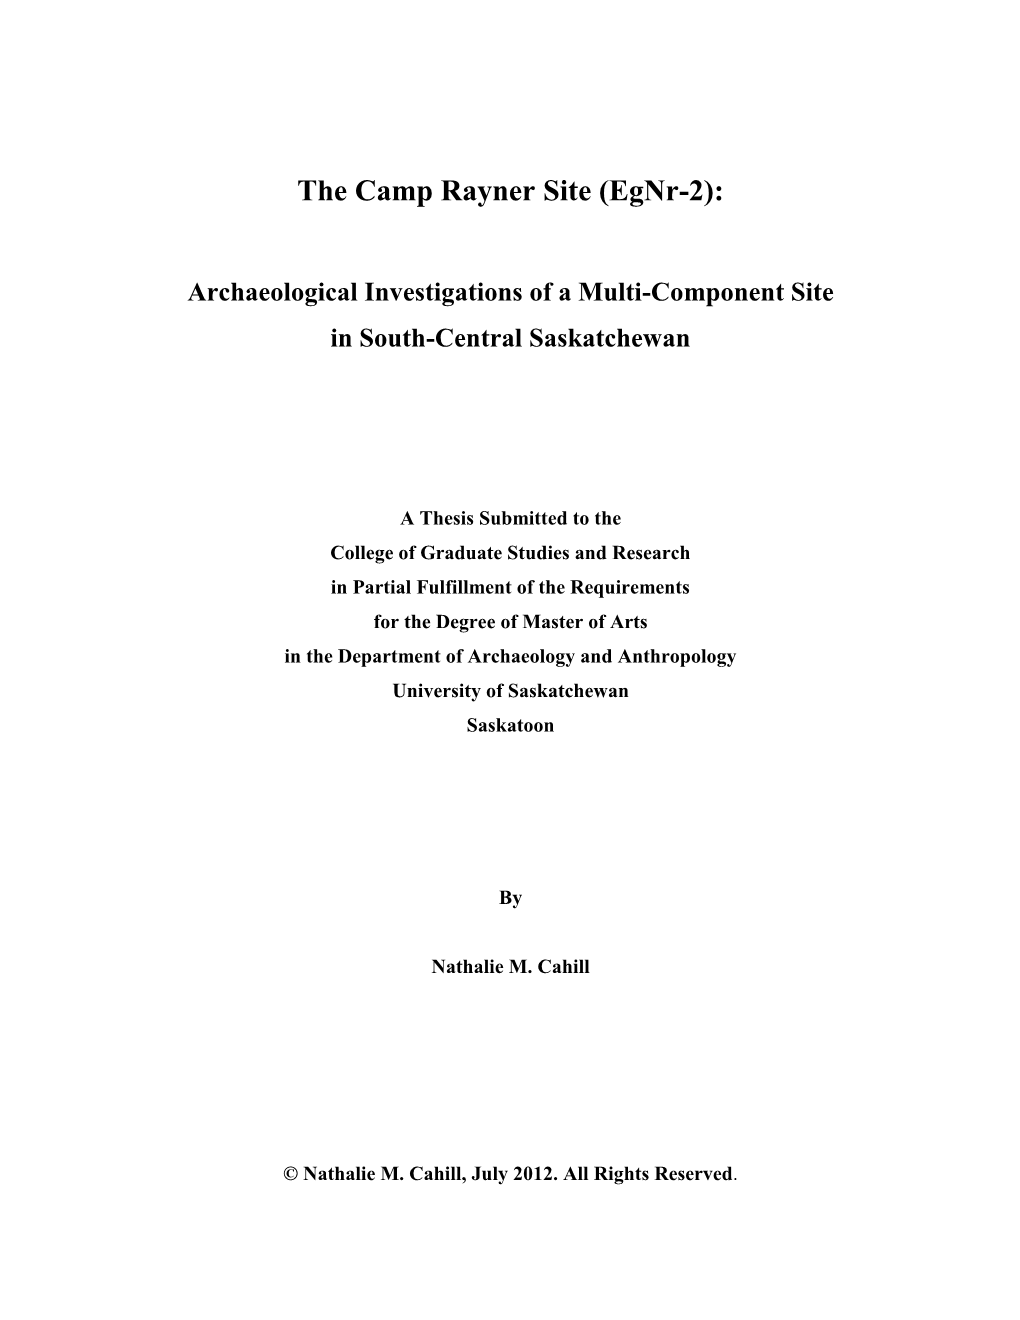 CAHILL-THESIS.Pdf (7.143Mb)